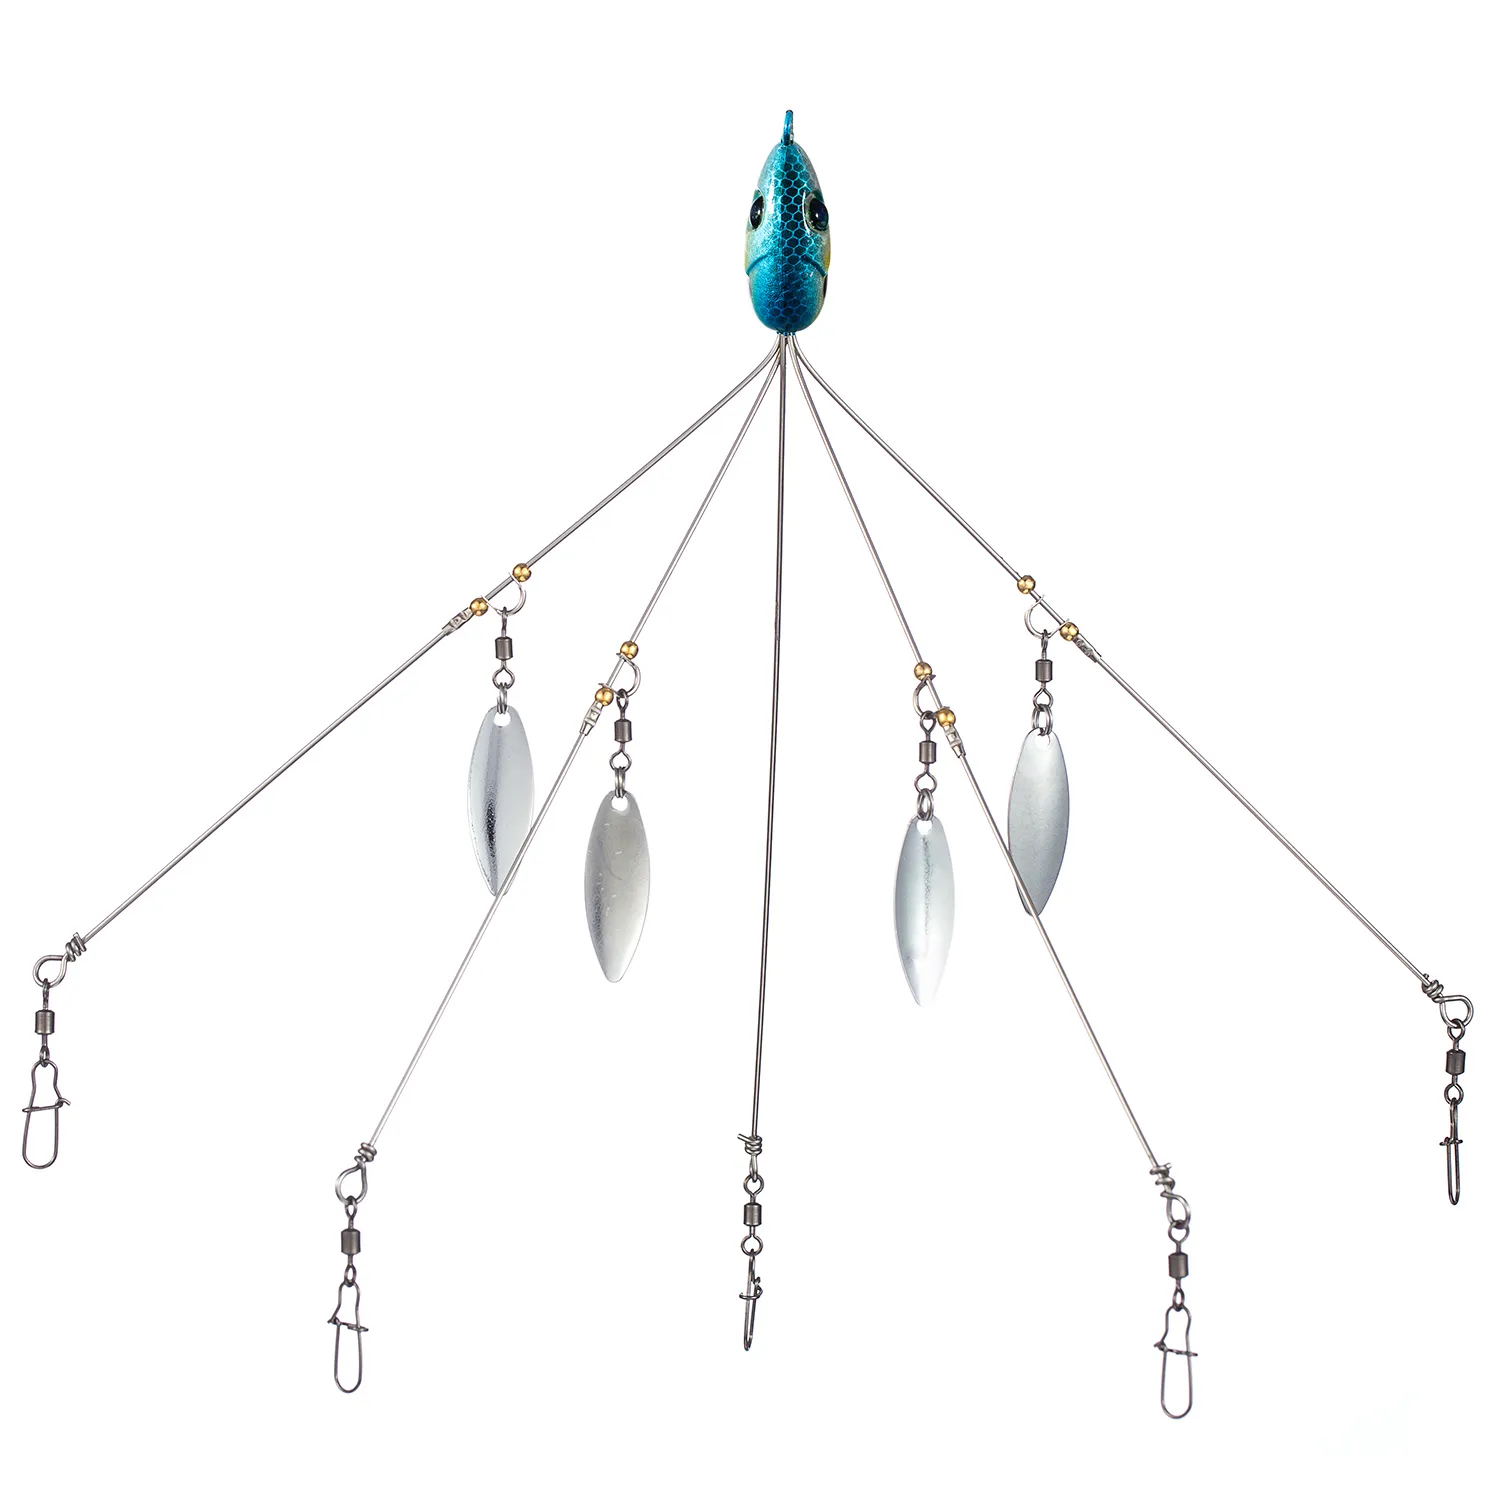 Bassdish Alabama Rig Head Swimming Bait Umbrella Rig 5 Arms Bass Fishing  Group Lure, Extendable 18g Y200830292s From Qjcpbs, $66.72